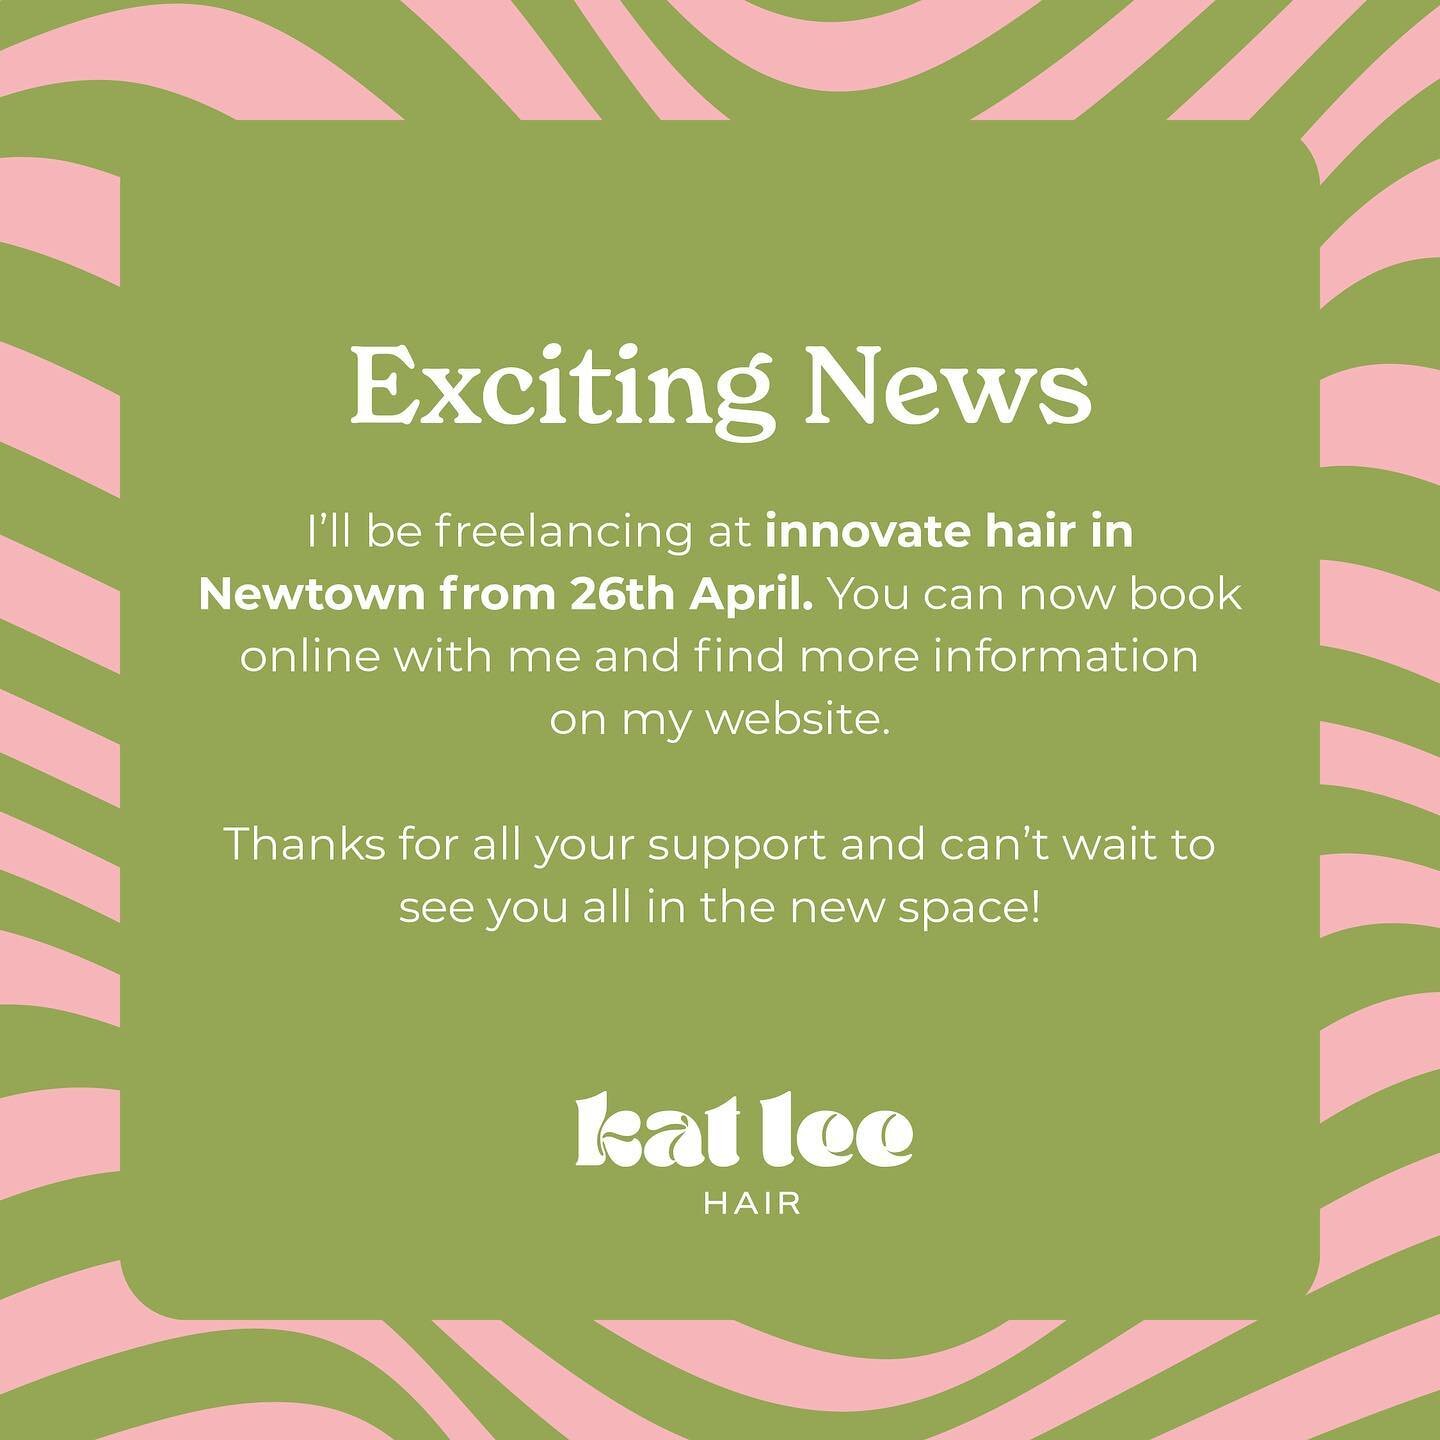 Hey friends, I&rsquo;ll be freelancing from Innovate hair from April 26th you can now book online with me via my website. 
Just want to say a big thanks 🙏 for all your support 😊🏳️&zwj;🌈💇🤸